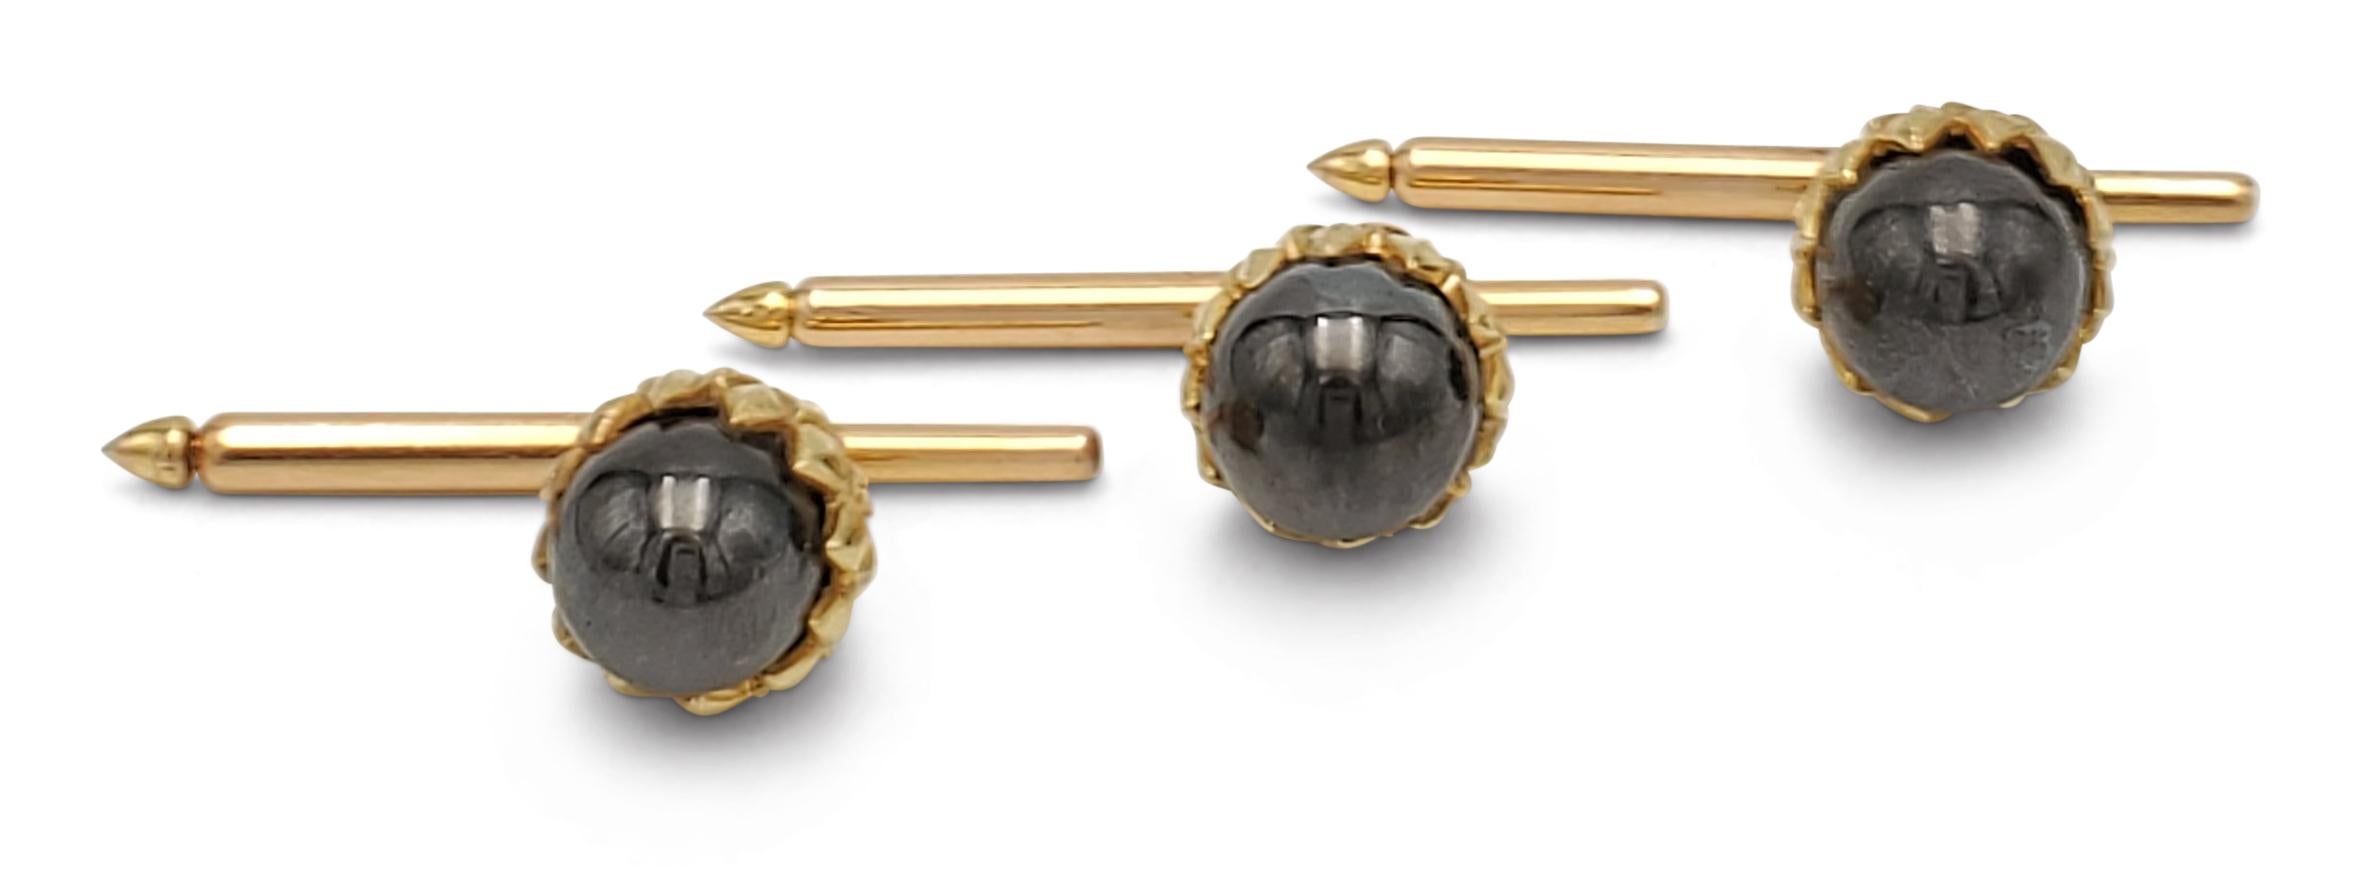 Authentic dress set created by Jean Schlumberger for Tiffany & Co. comprised of a pair of cufflinks and three dress studs. Each piece is designed as an acorn with a hematite sphere covered with gold leaves. Each cufflink measures 1/2 inch, shirt